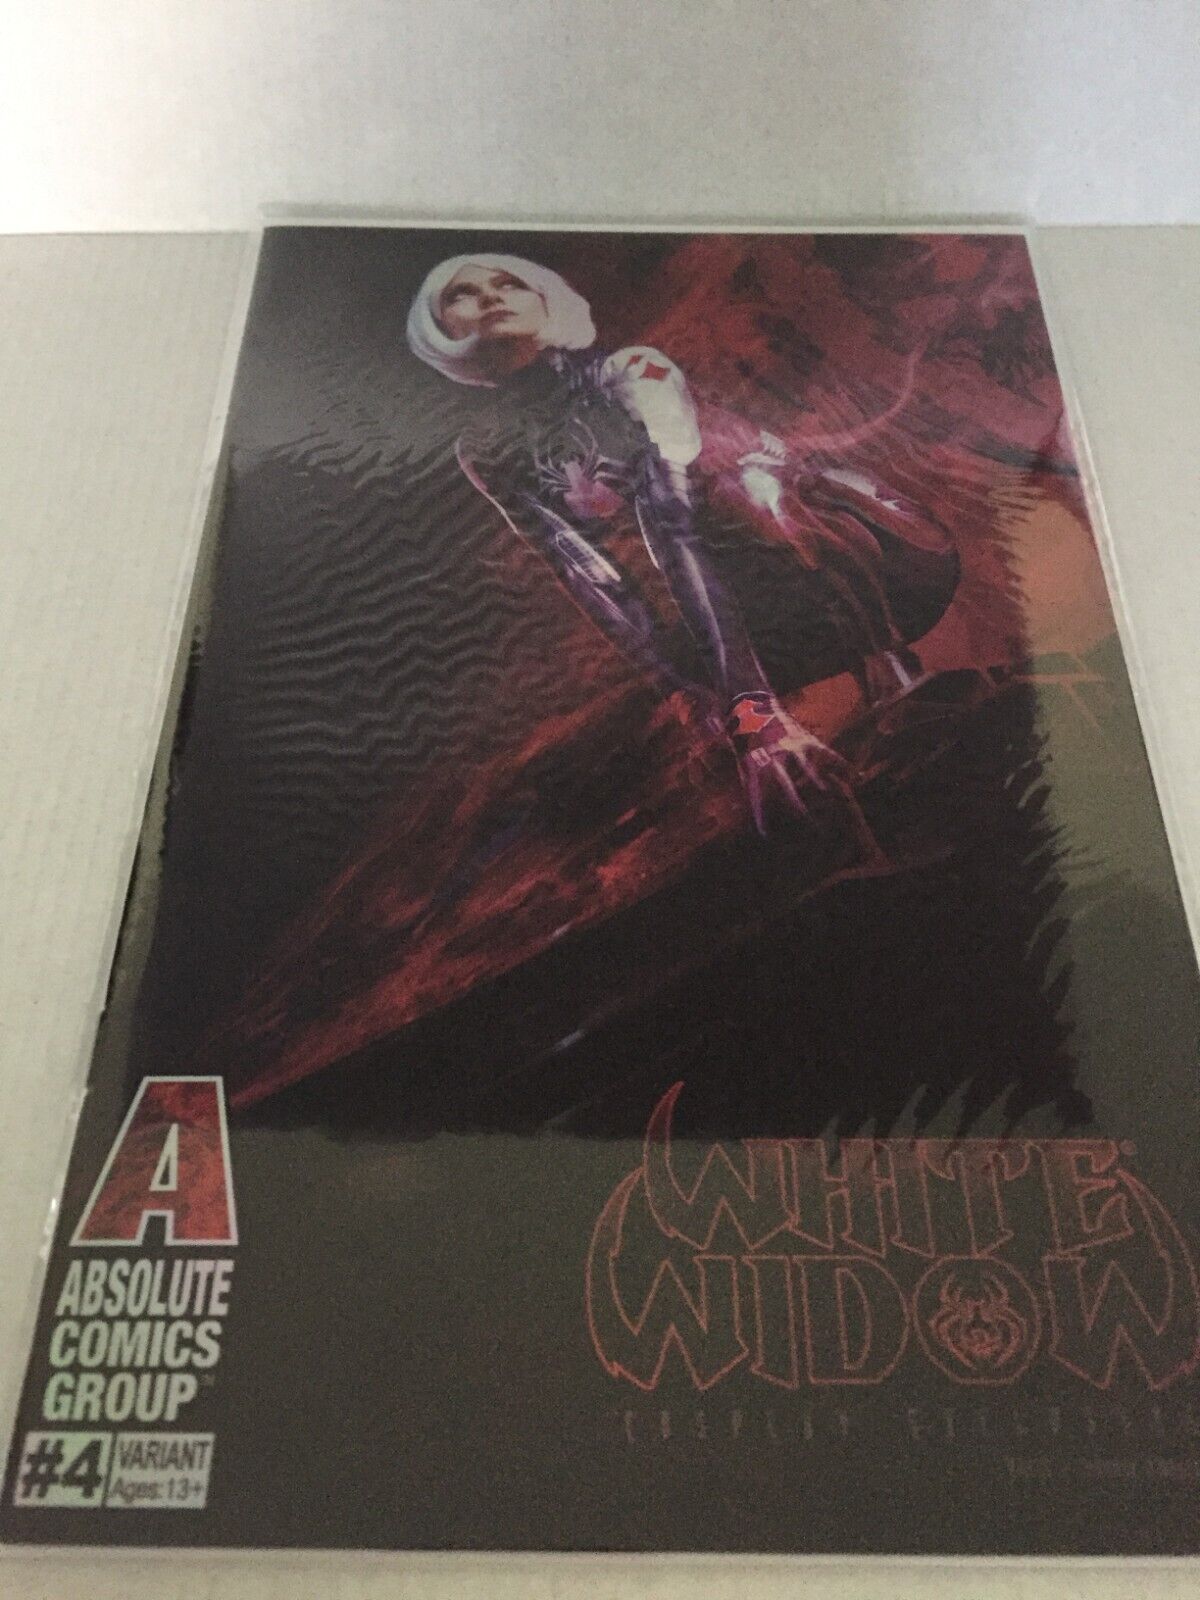 2020 Absolute Comics White Widow Kincaid Cosplay Red Foil Variant Cover #4